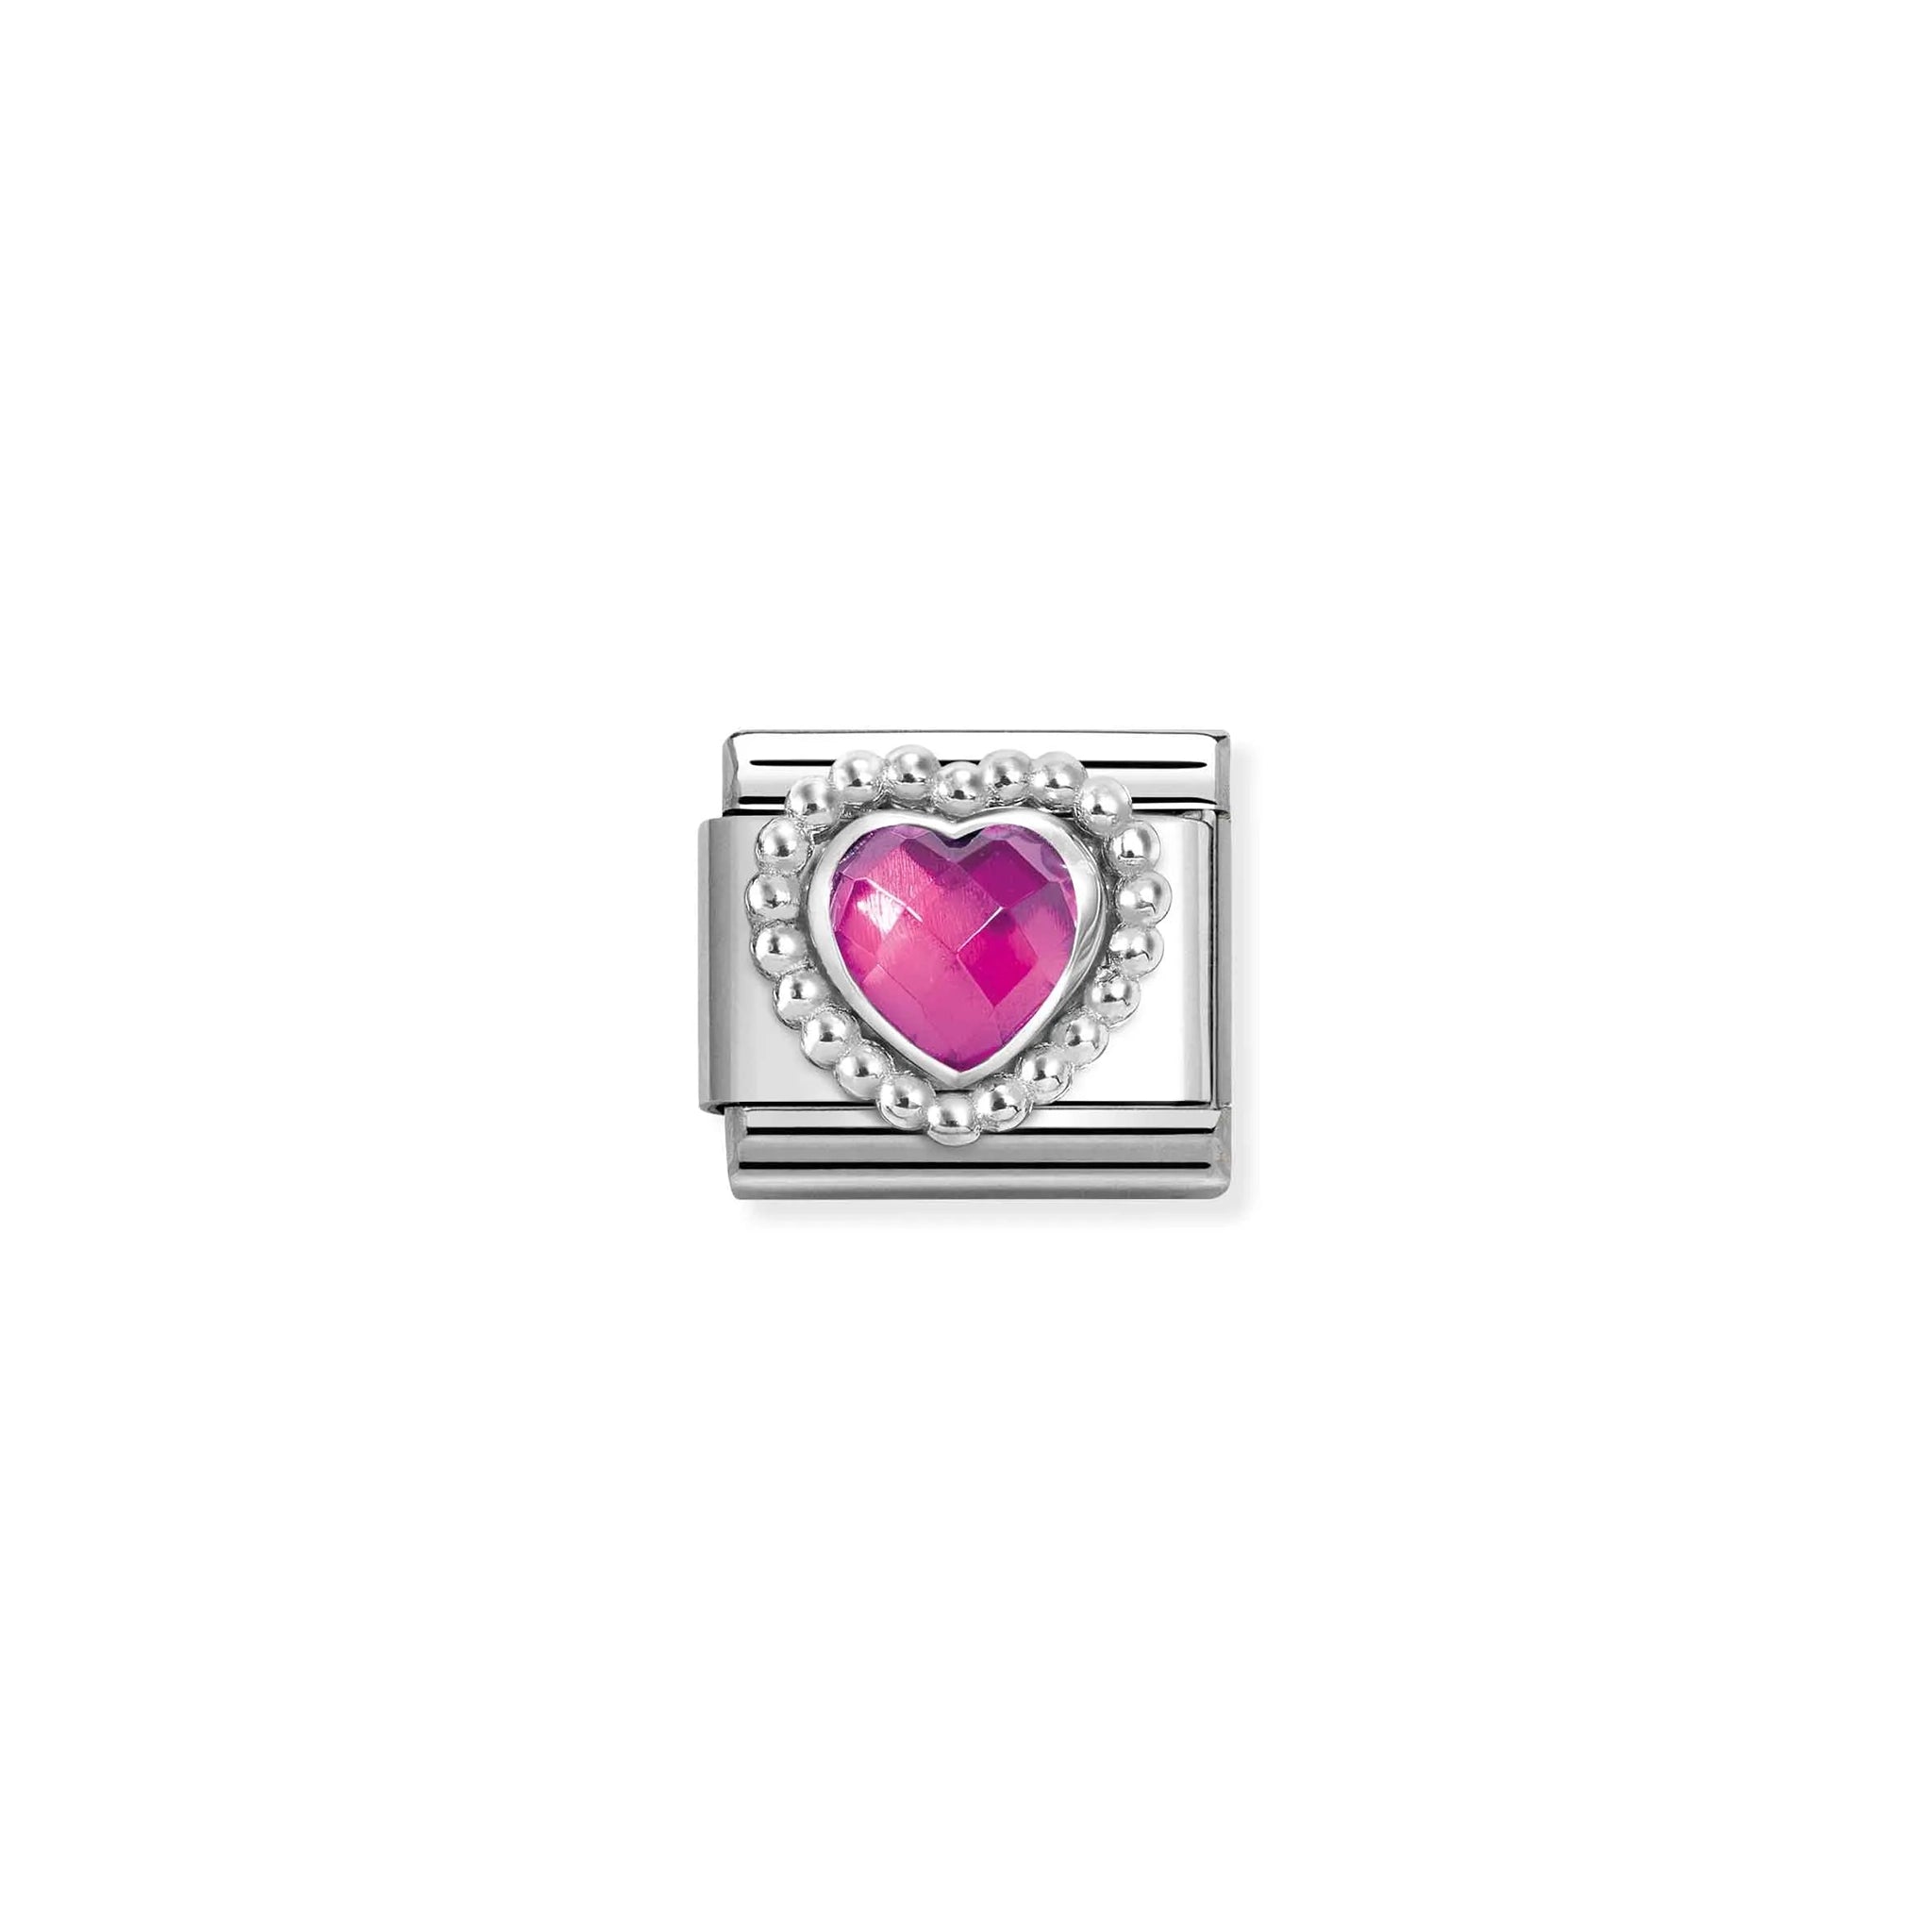 A silver Nomination charm featuring a pink faceted heart shaped stone in a popcorn frame